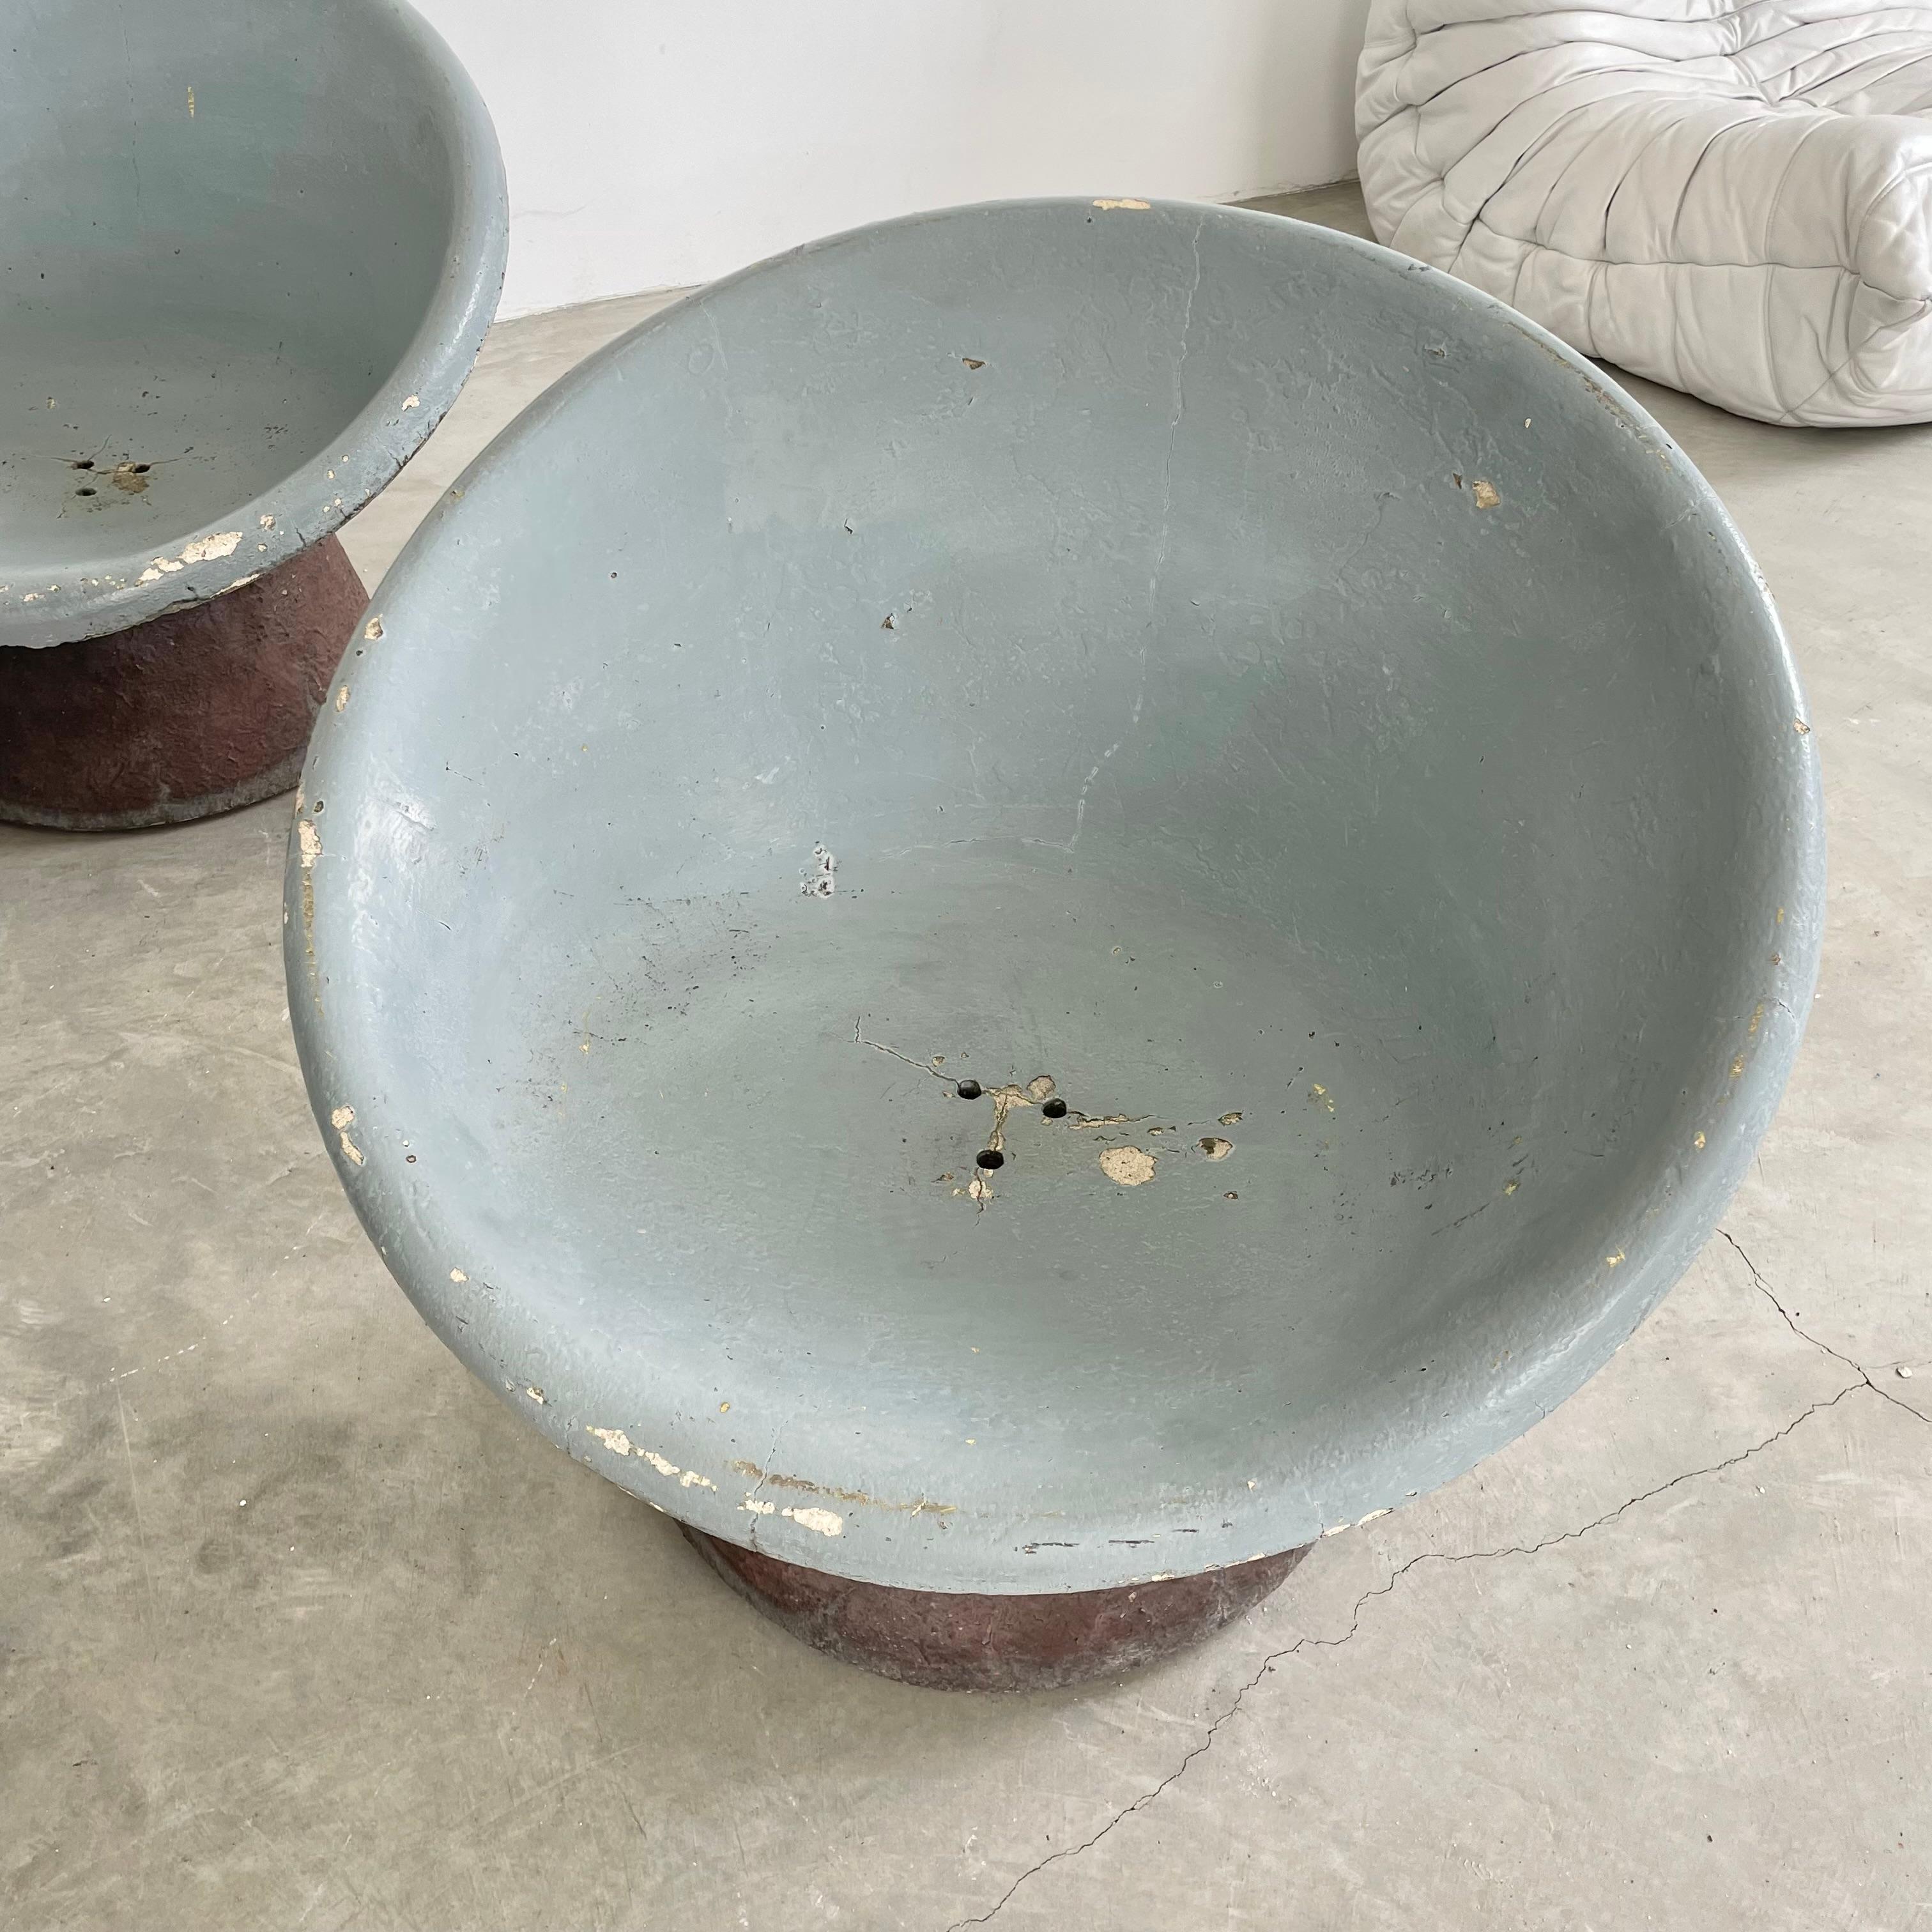 Sculptural Concrete Chairs and Table, 1960s, Switzerland For Sale 3